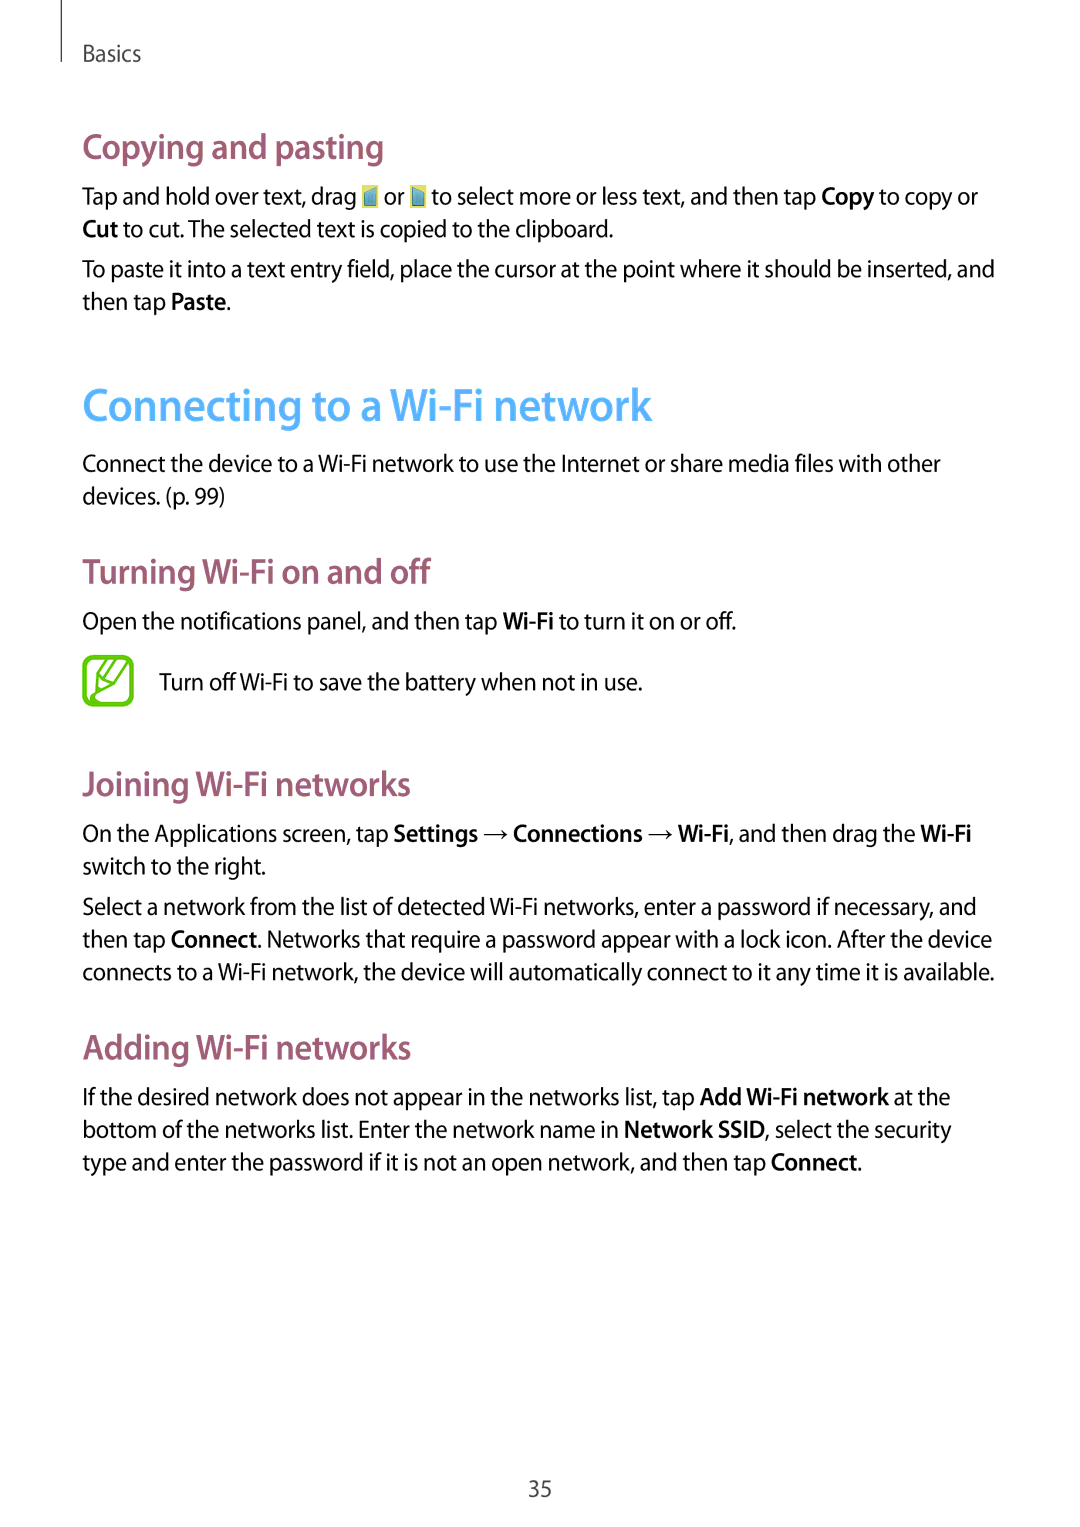 Samsung SM-G386FZKAPRT Connecting to a Wi-Fi network, Copying and pasting, Turning Wi-Fi on and off, Adding Wi-Fi networks 